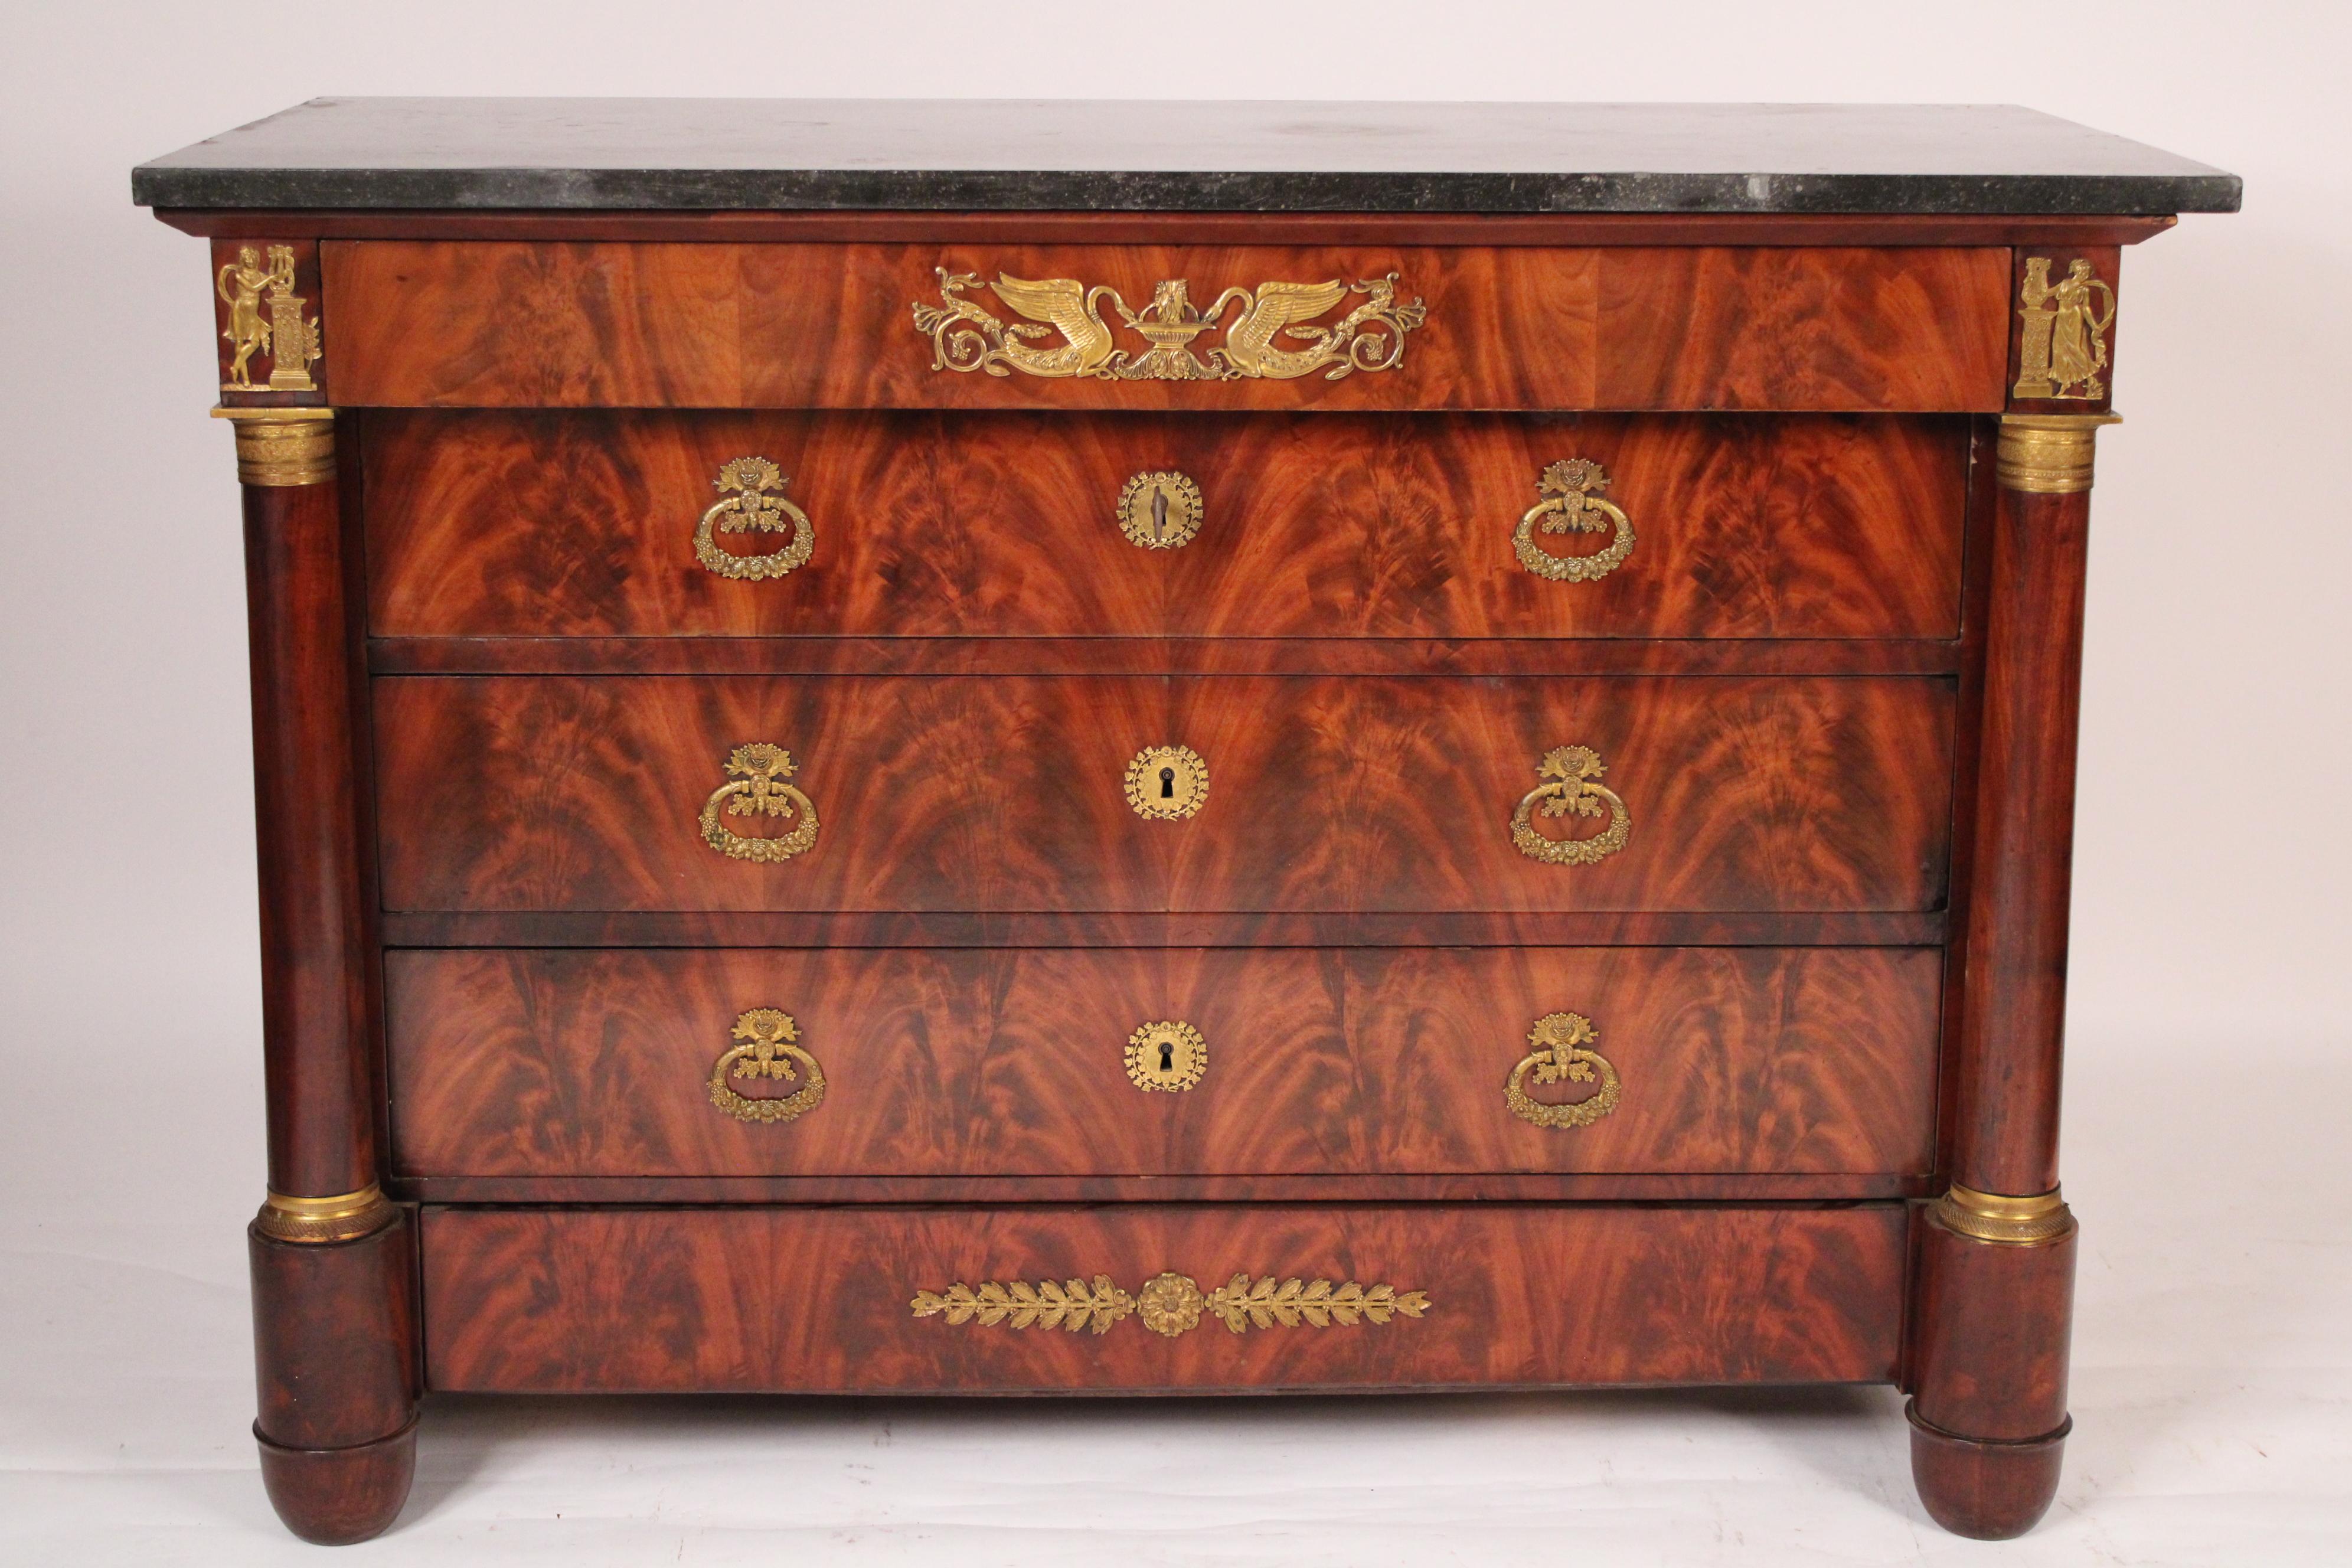 Antique Empire flame mahogany chest of drawers with gilt bronze mounts and marble top, early 19th century. With a rectangular marble top, the top drawer with a central gilt bronze mount of swans drinking from a fountain,  flanked by gilt bronze